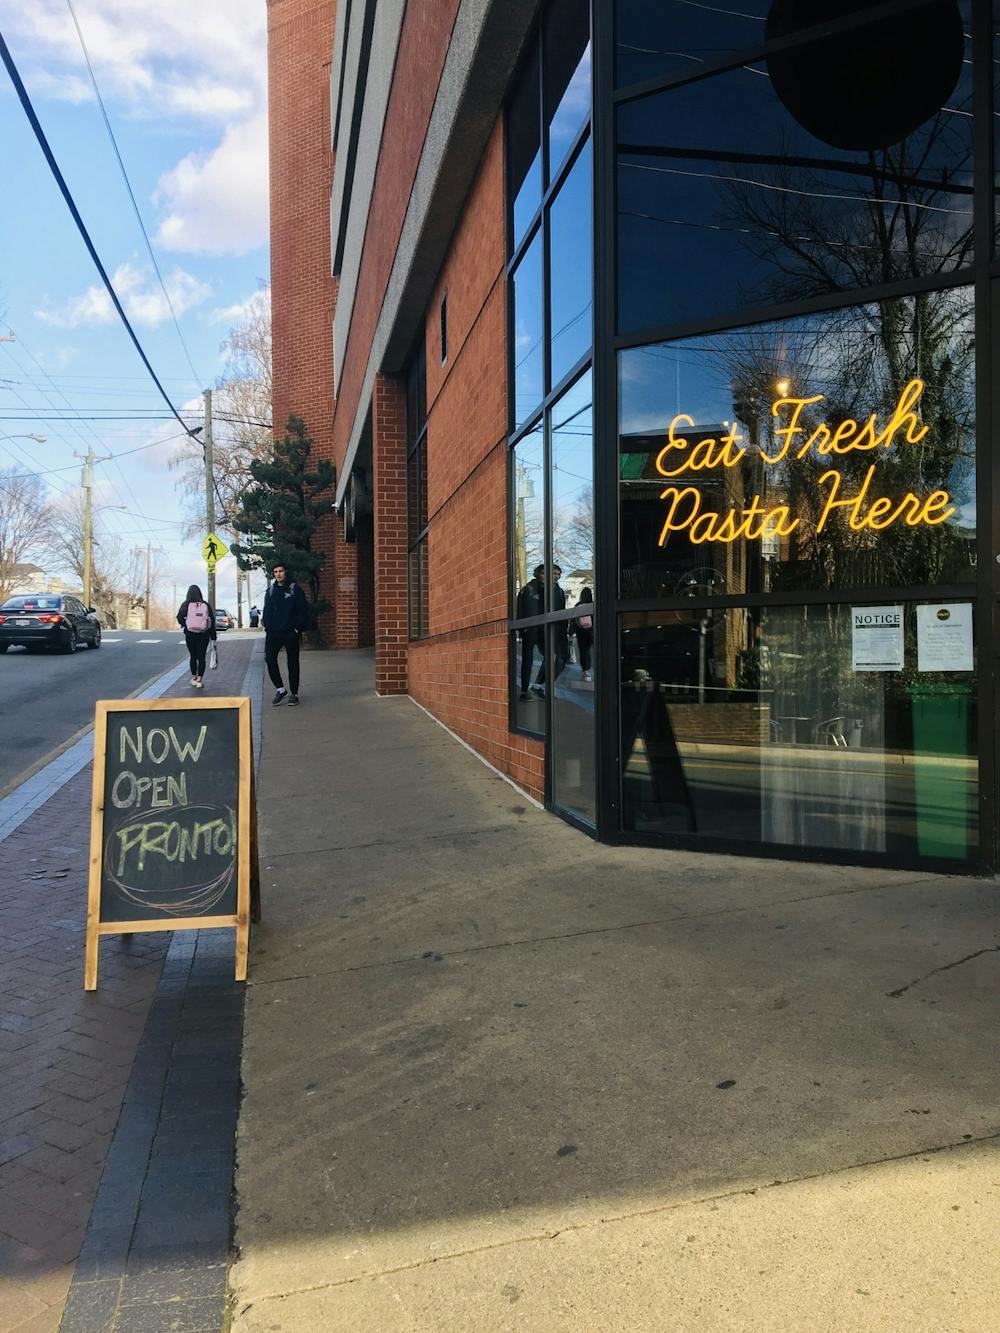 Pronto! is the new go-to pasta place on the Corner.